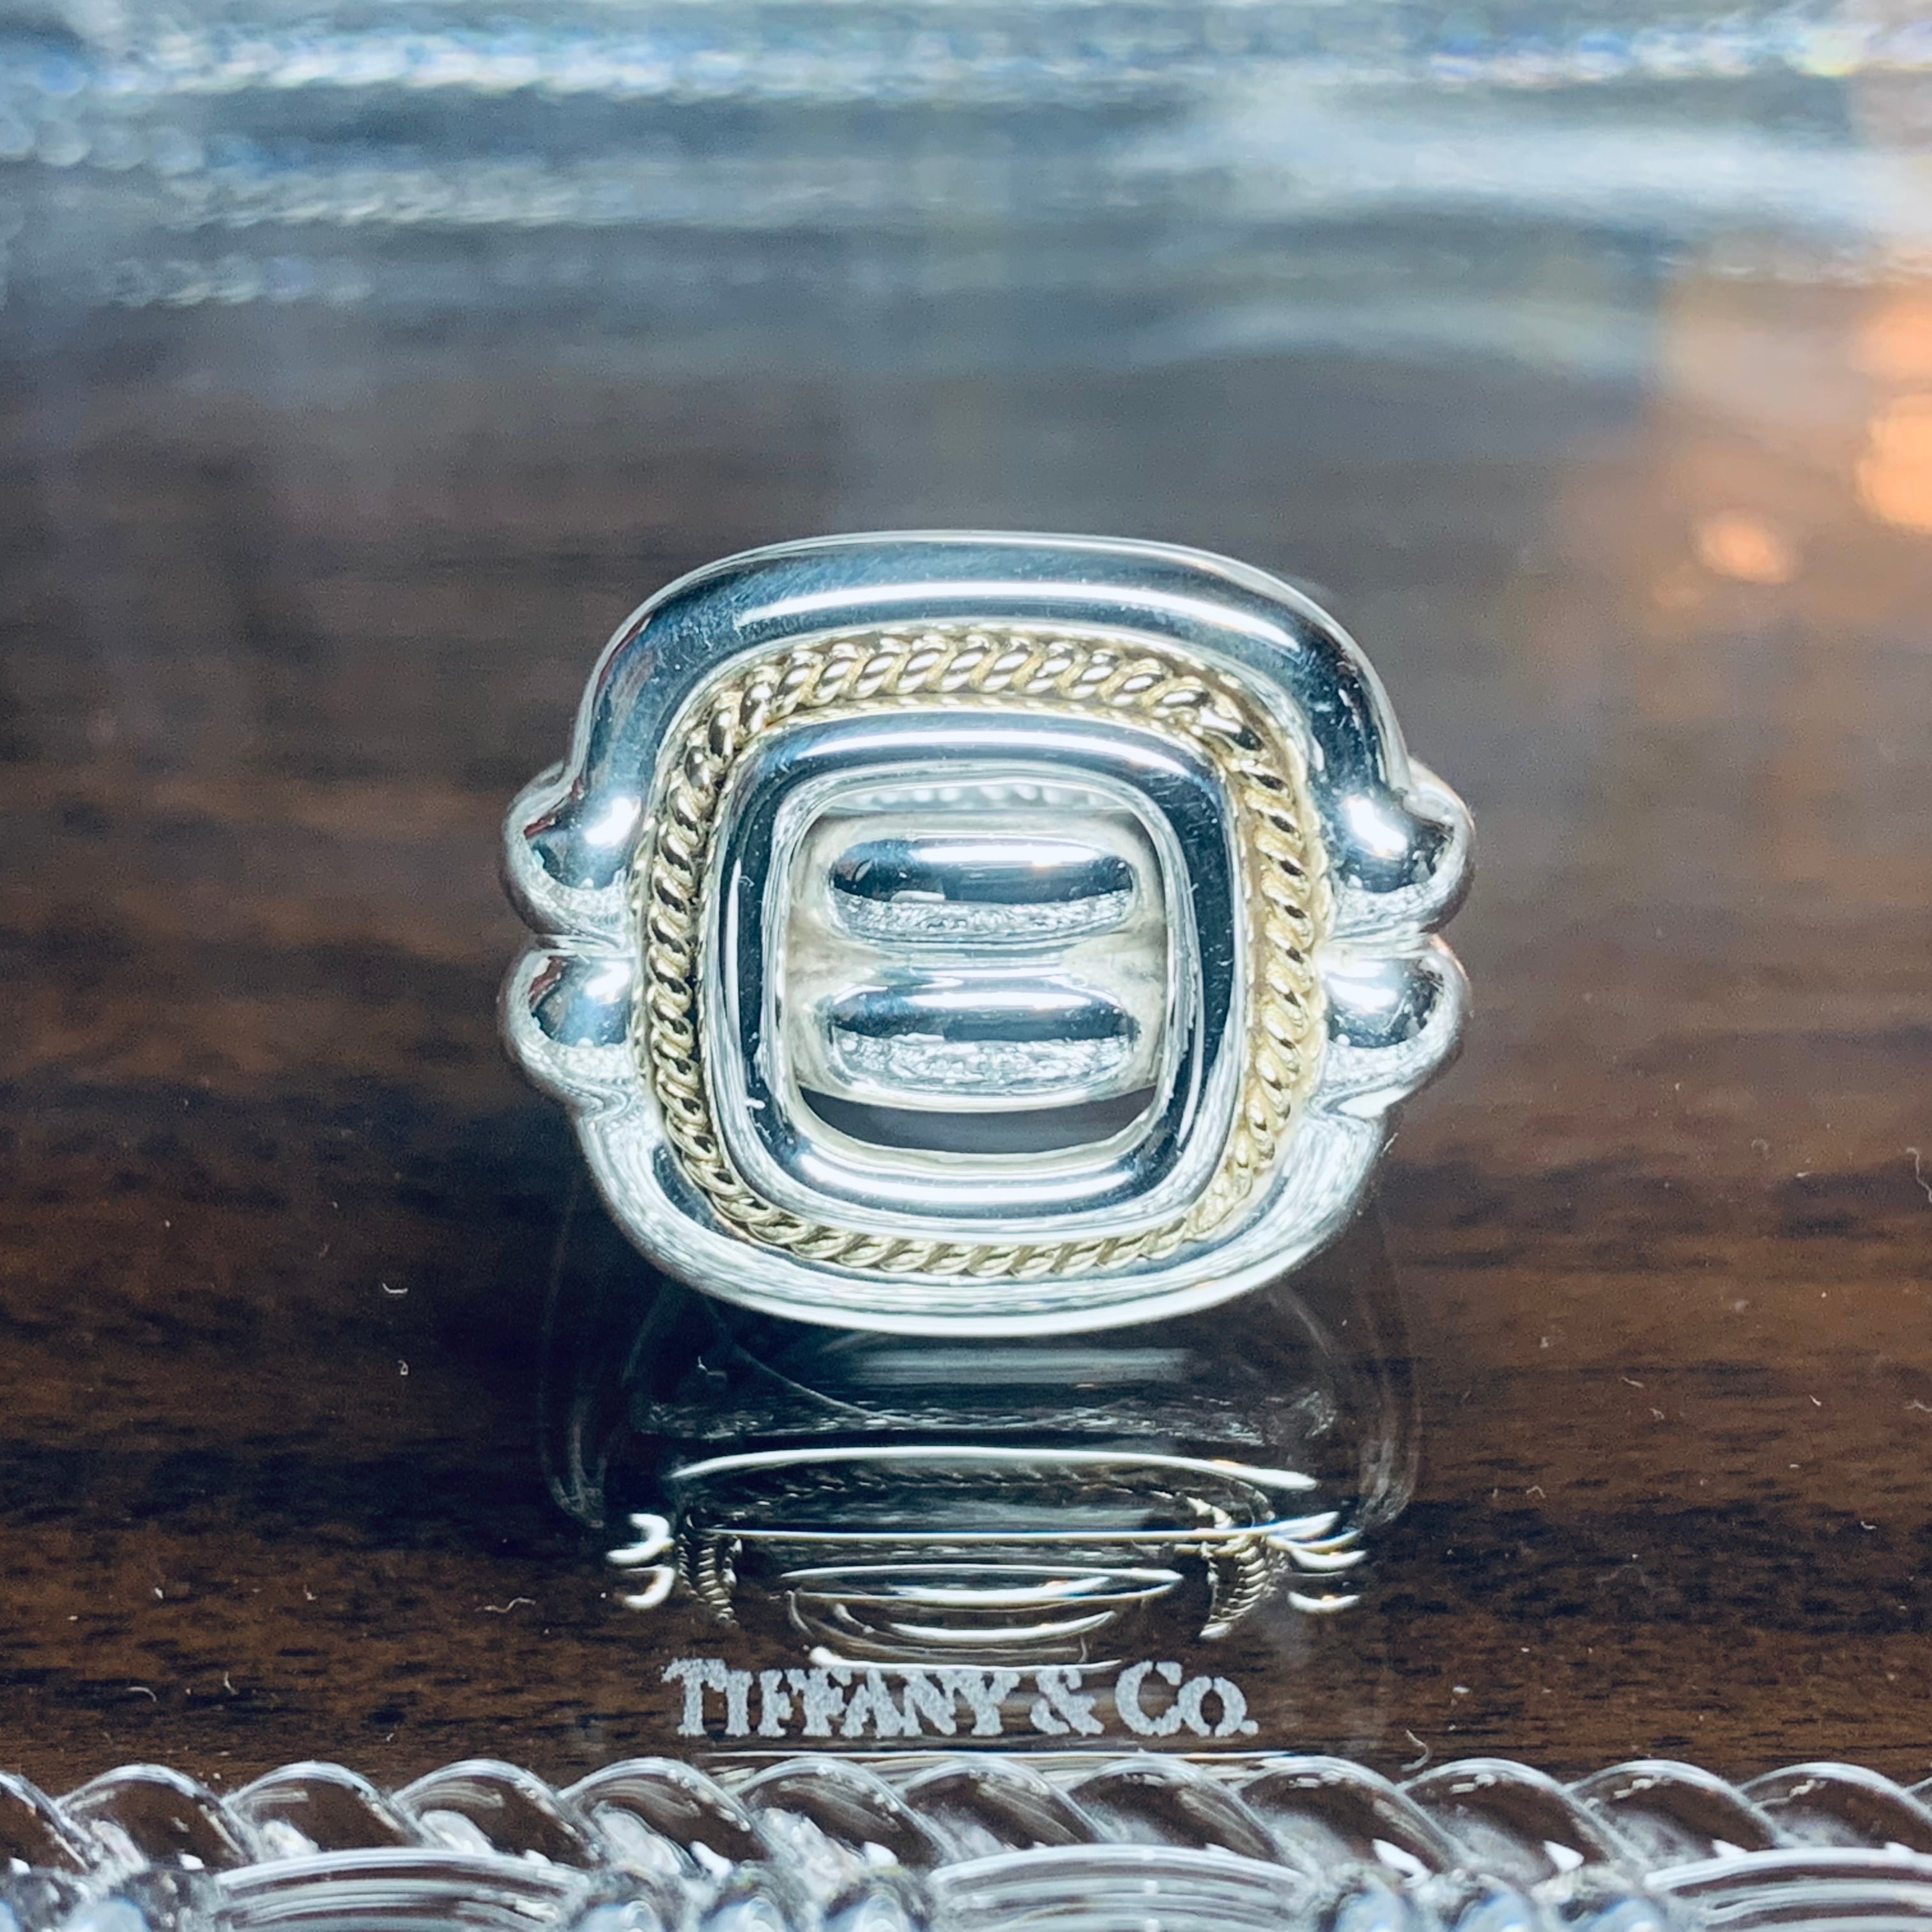 VINTAGE TIFFANY & CO. 18K Gold Combi Cushion Ring Sterling Silver